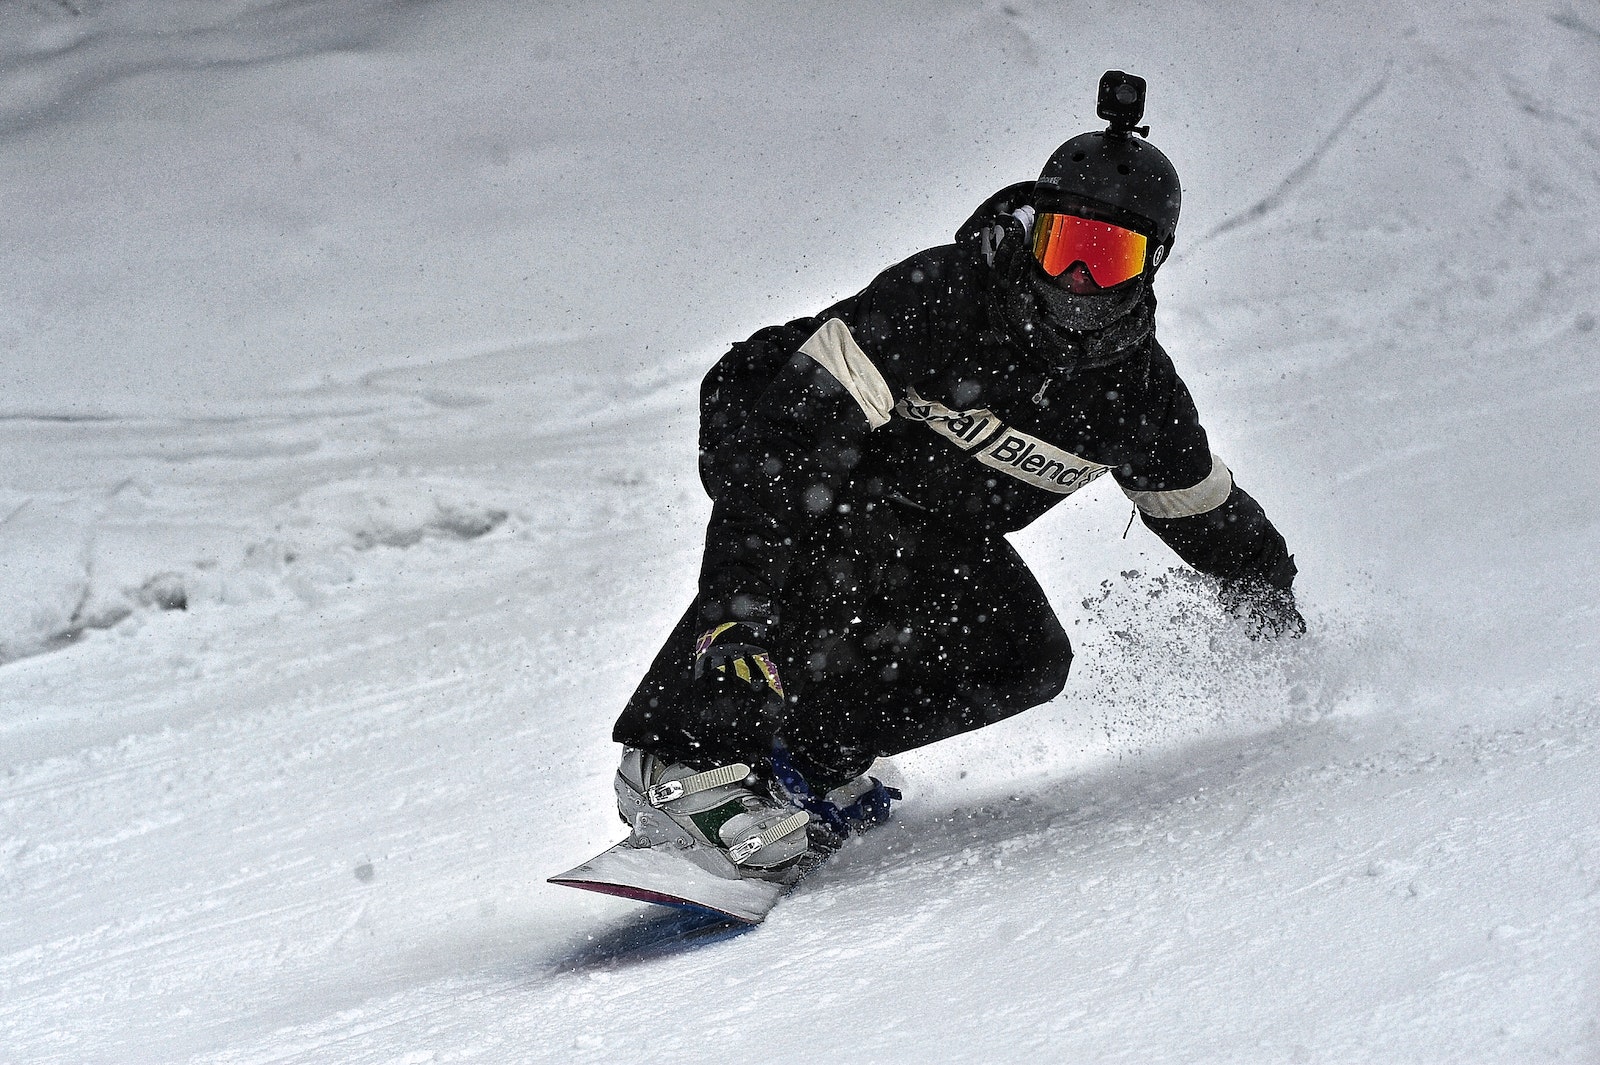 Person in Black Jacket and Black Pants Riding on Snowboard